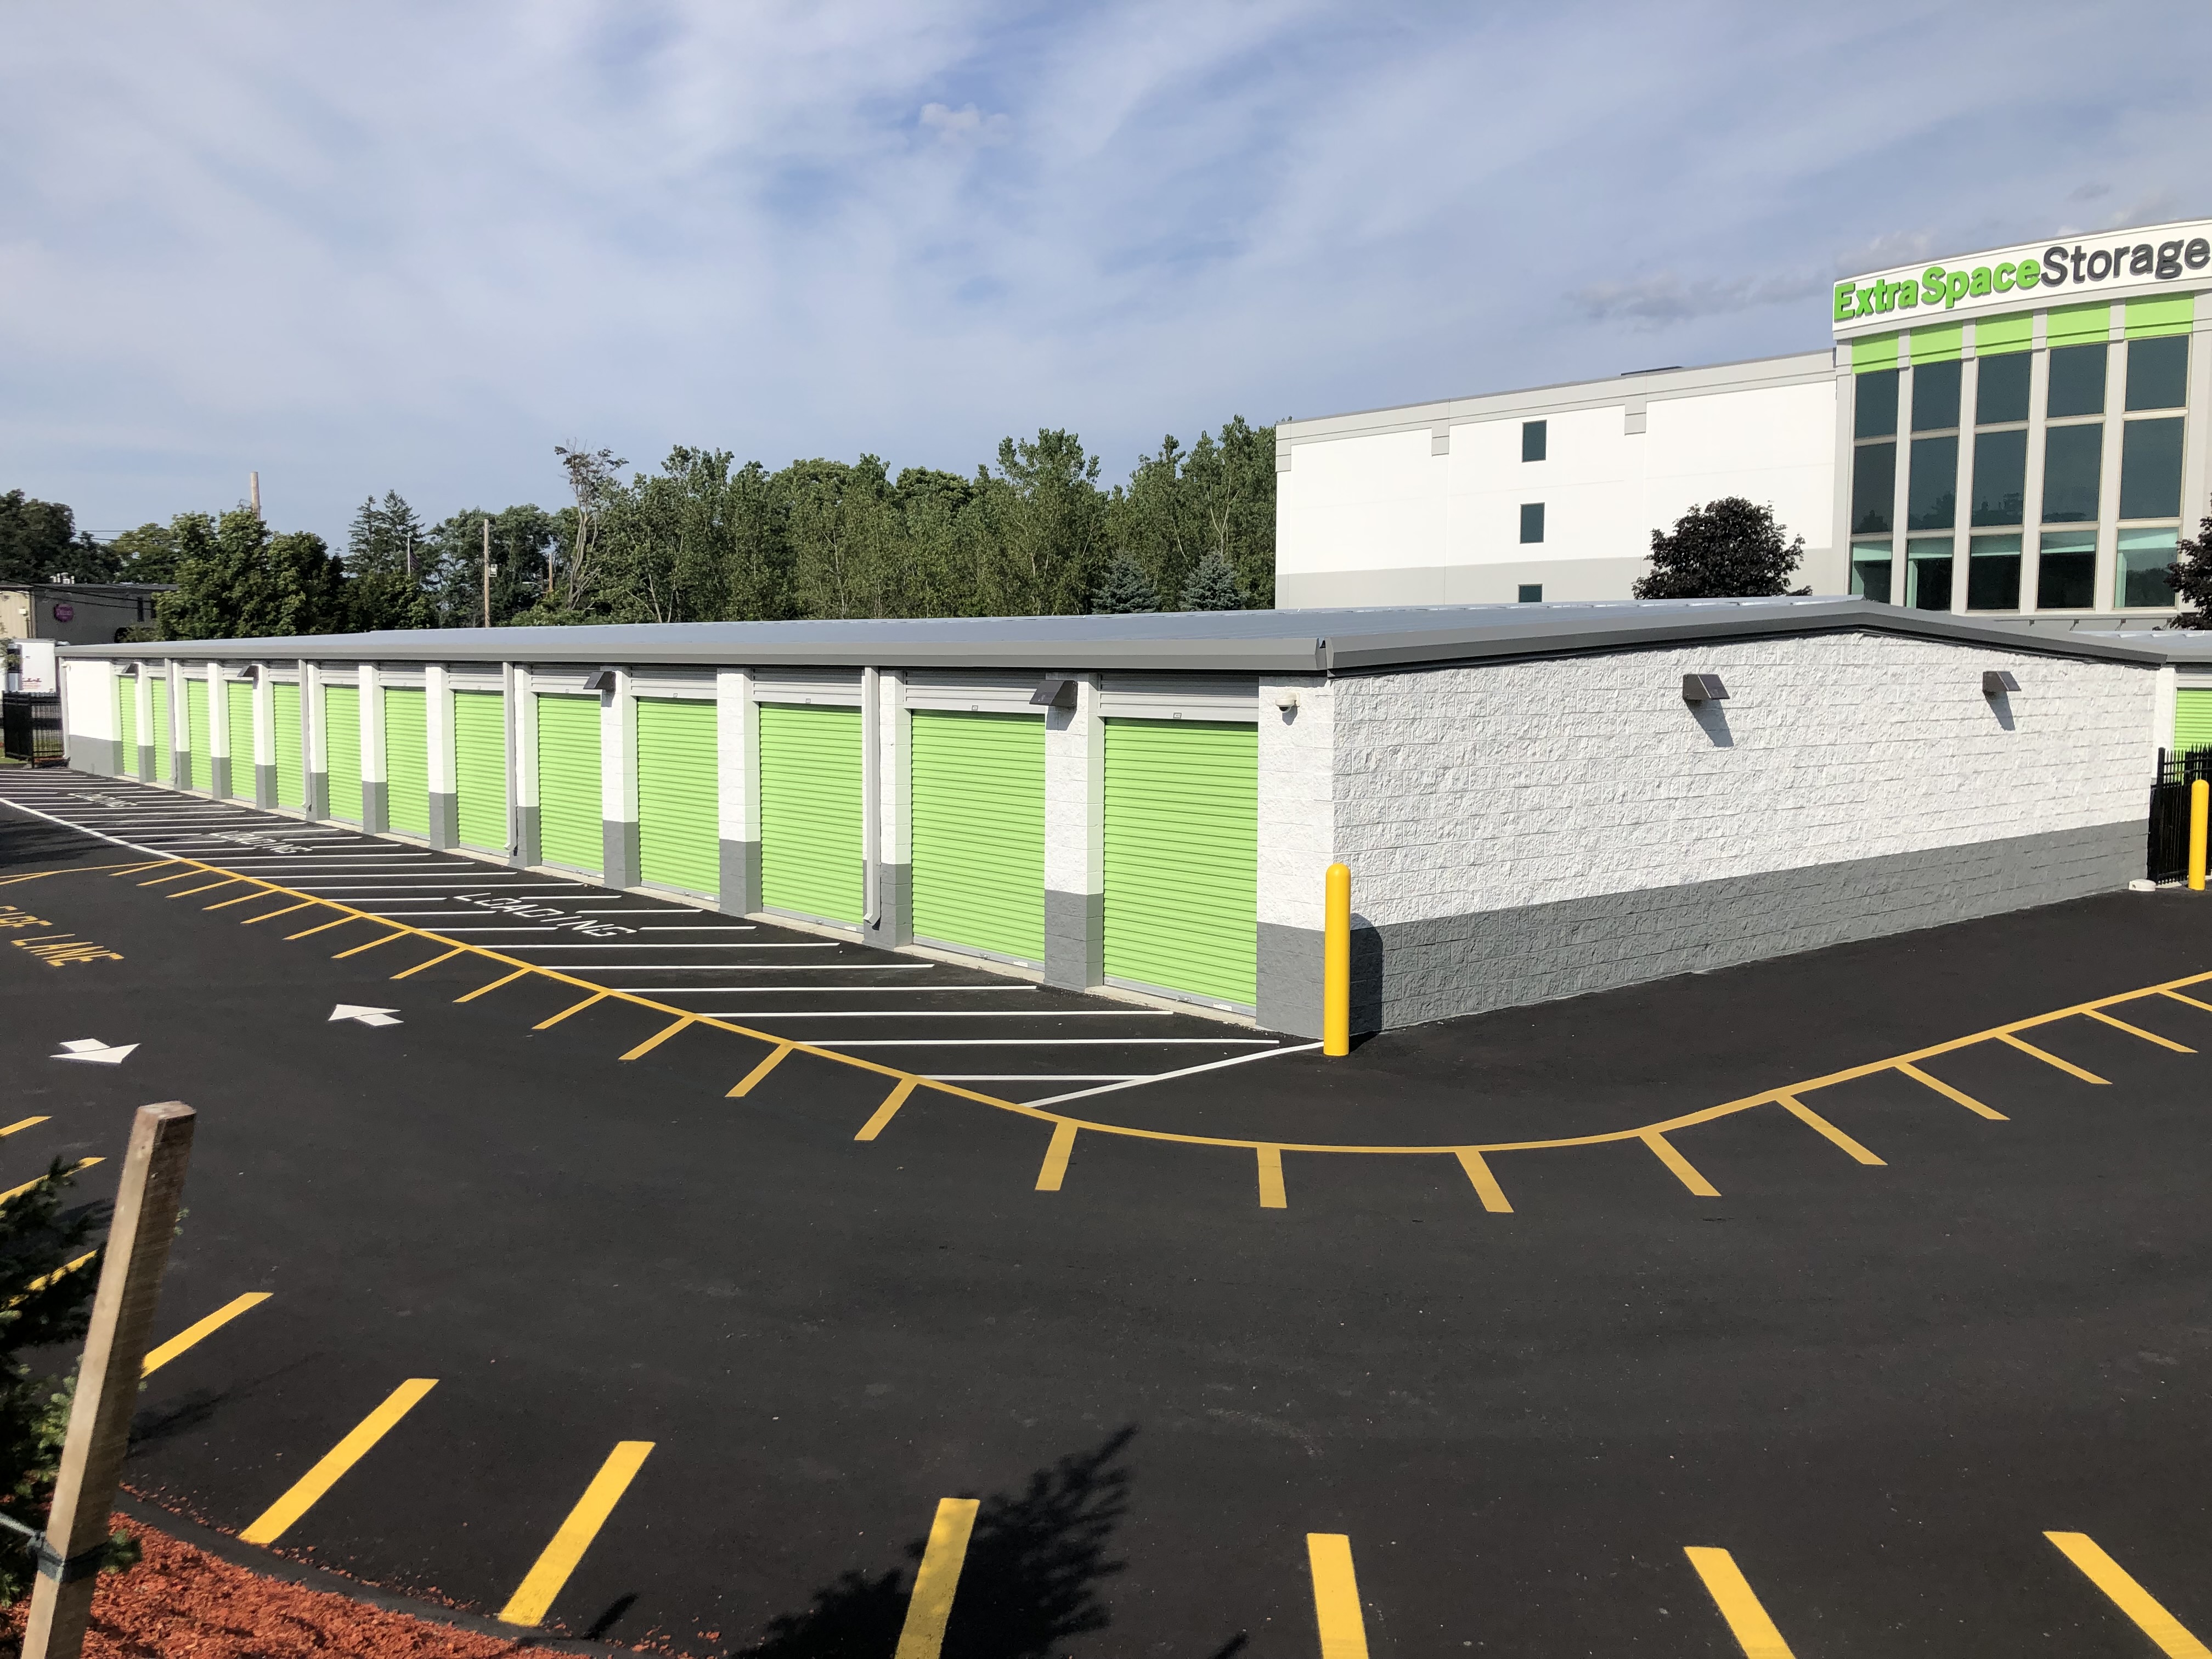 Extra Space Storage facility in Danvers, MA after expansion project in 2019